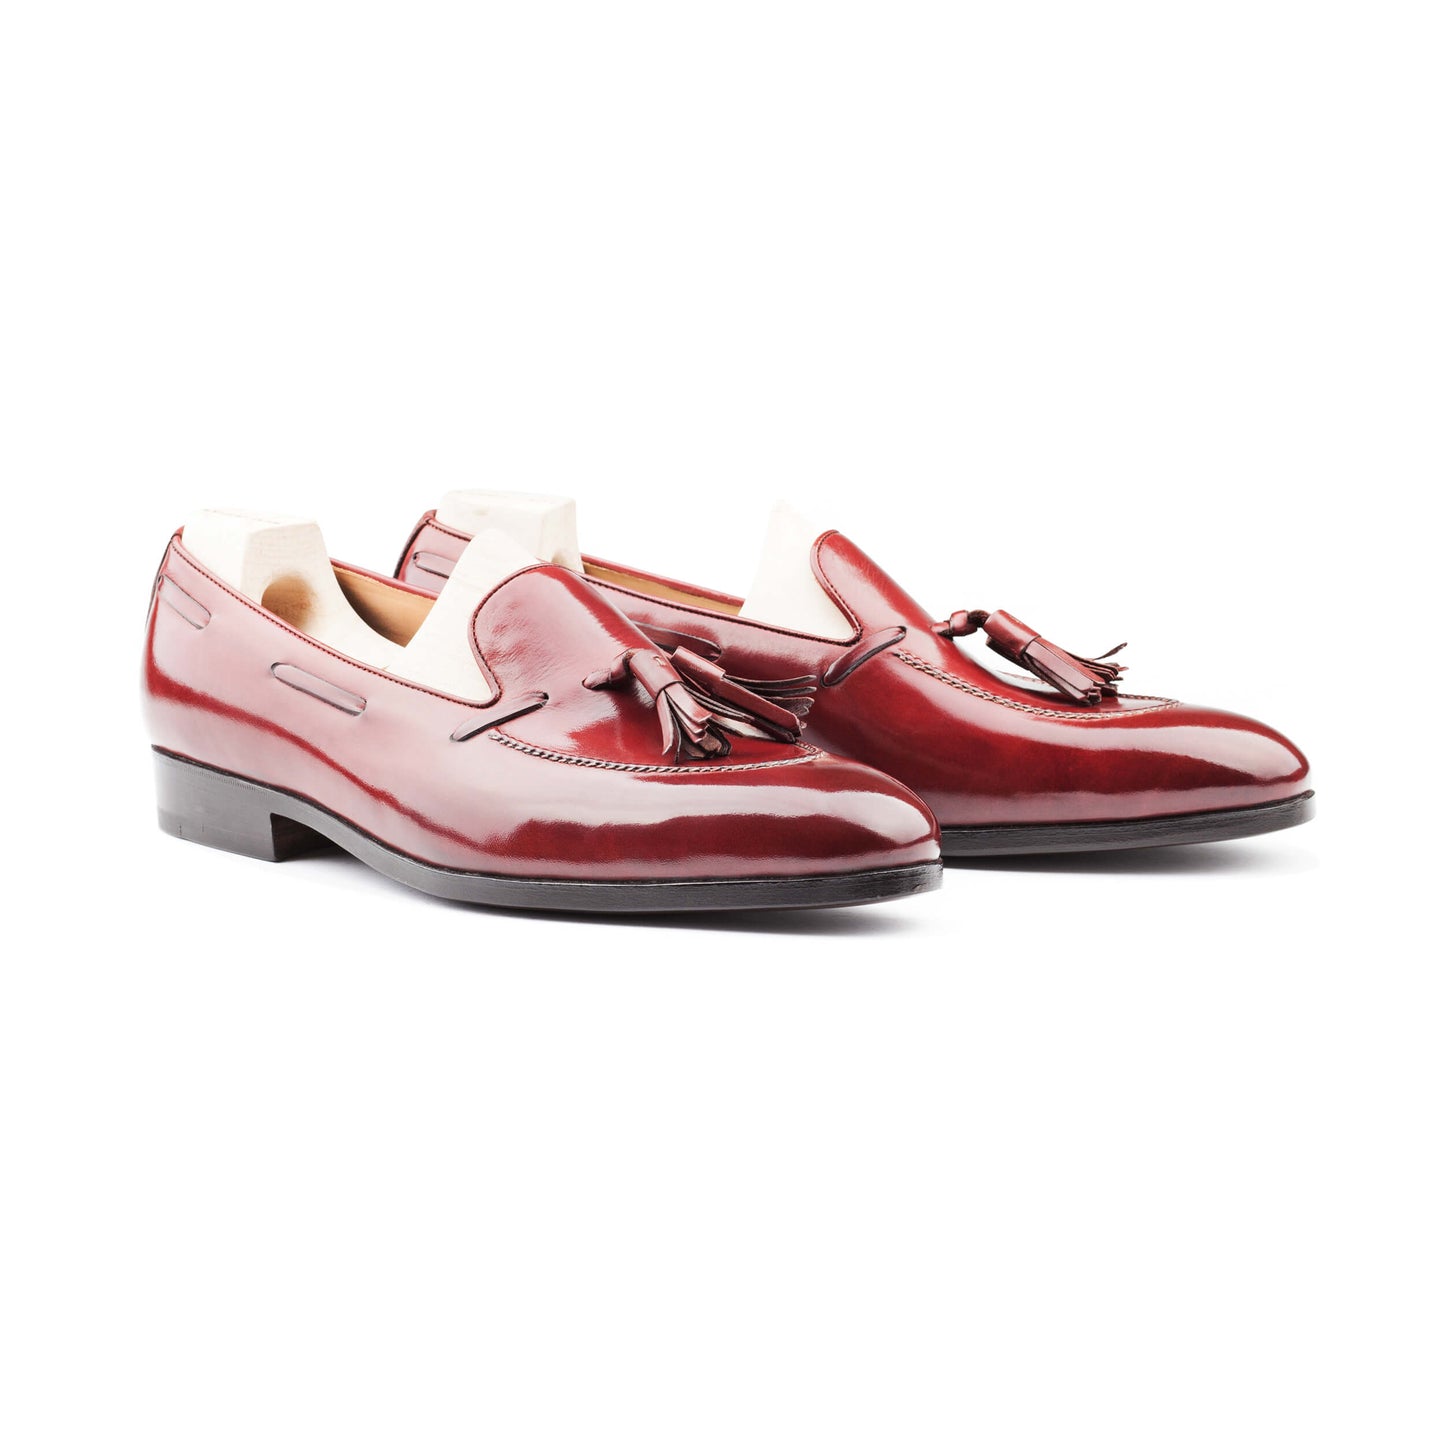 Tassel Loafer with hand stitched apron, short vamp